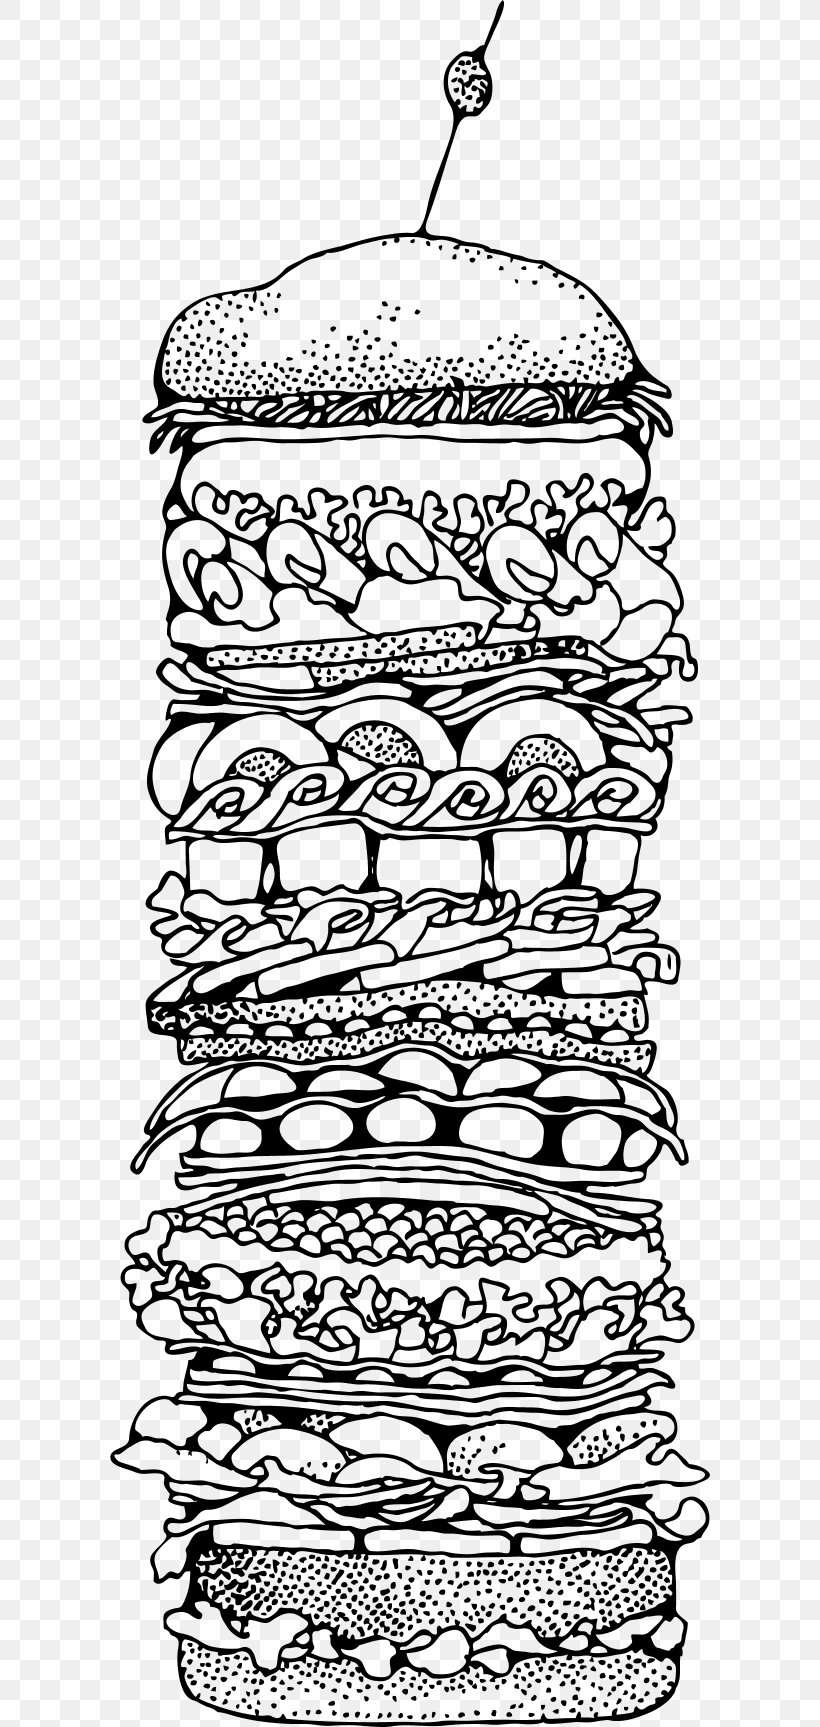 Peanut Butter And Jelly Sandwich Submarine Sandwich Hamburger French Fries Fast Food, PNG, 600x1727px, Peanut Butter And Jelly Sandwich, Area, Black And White, Butterbrot, Cheese Download Free